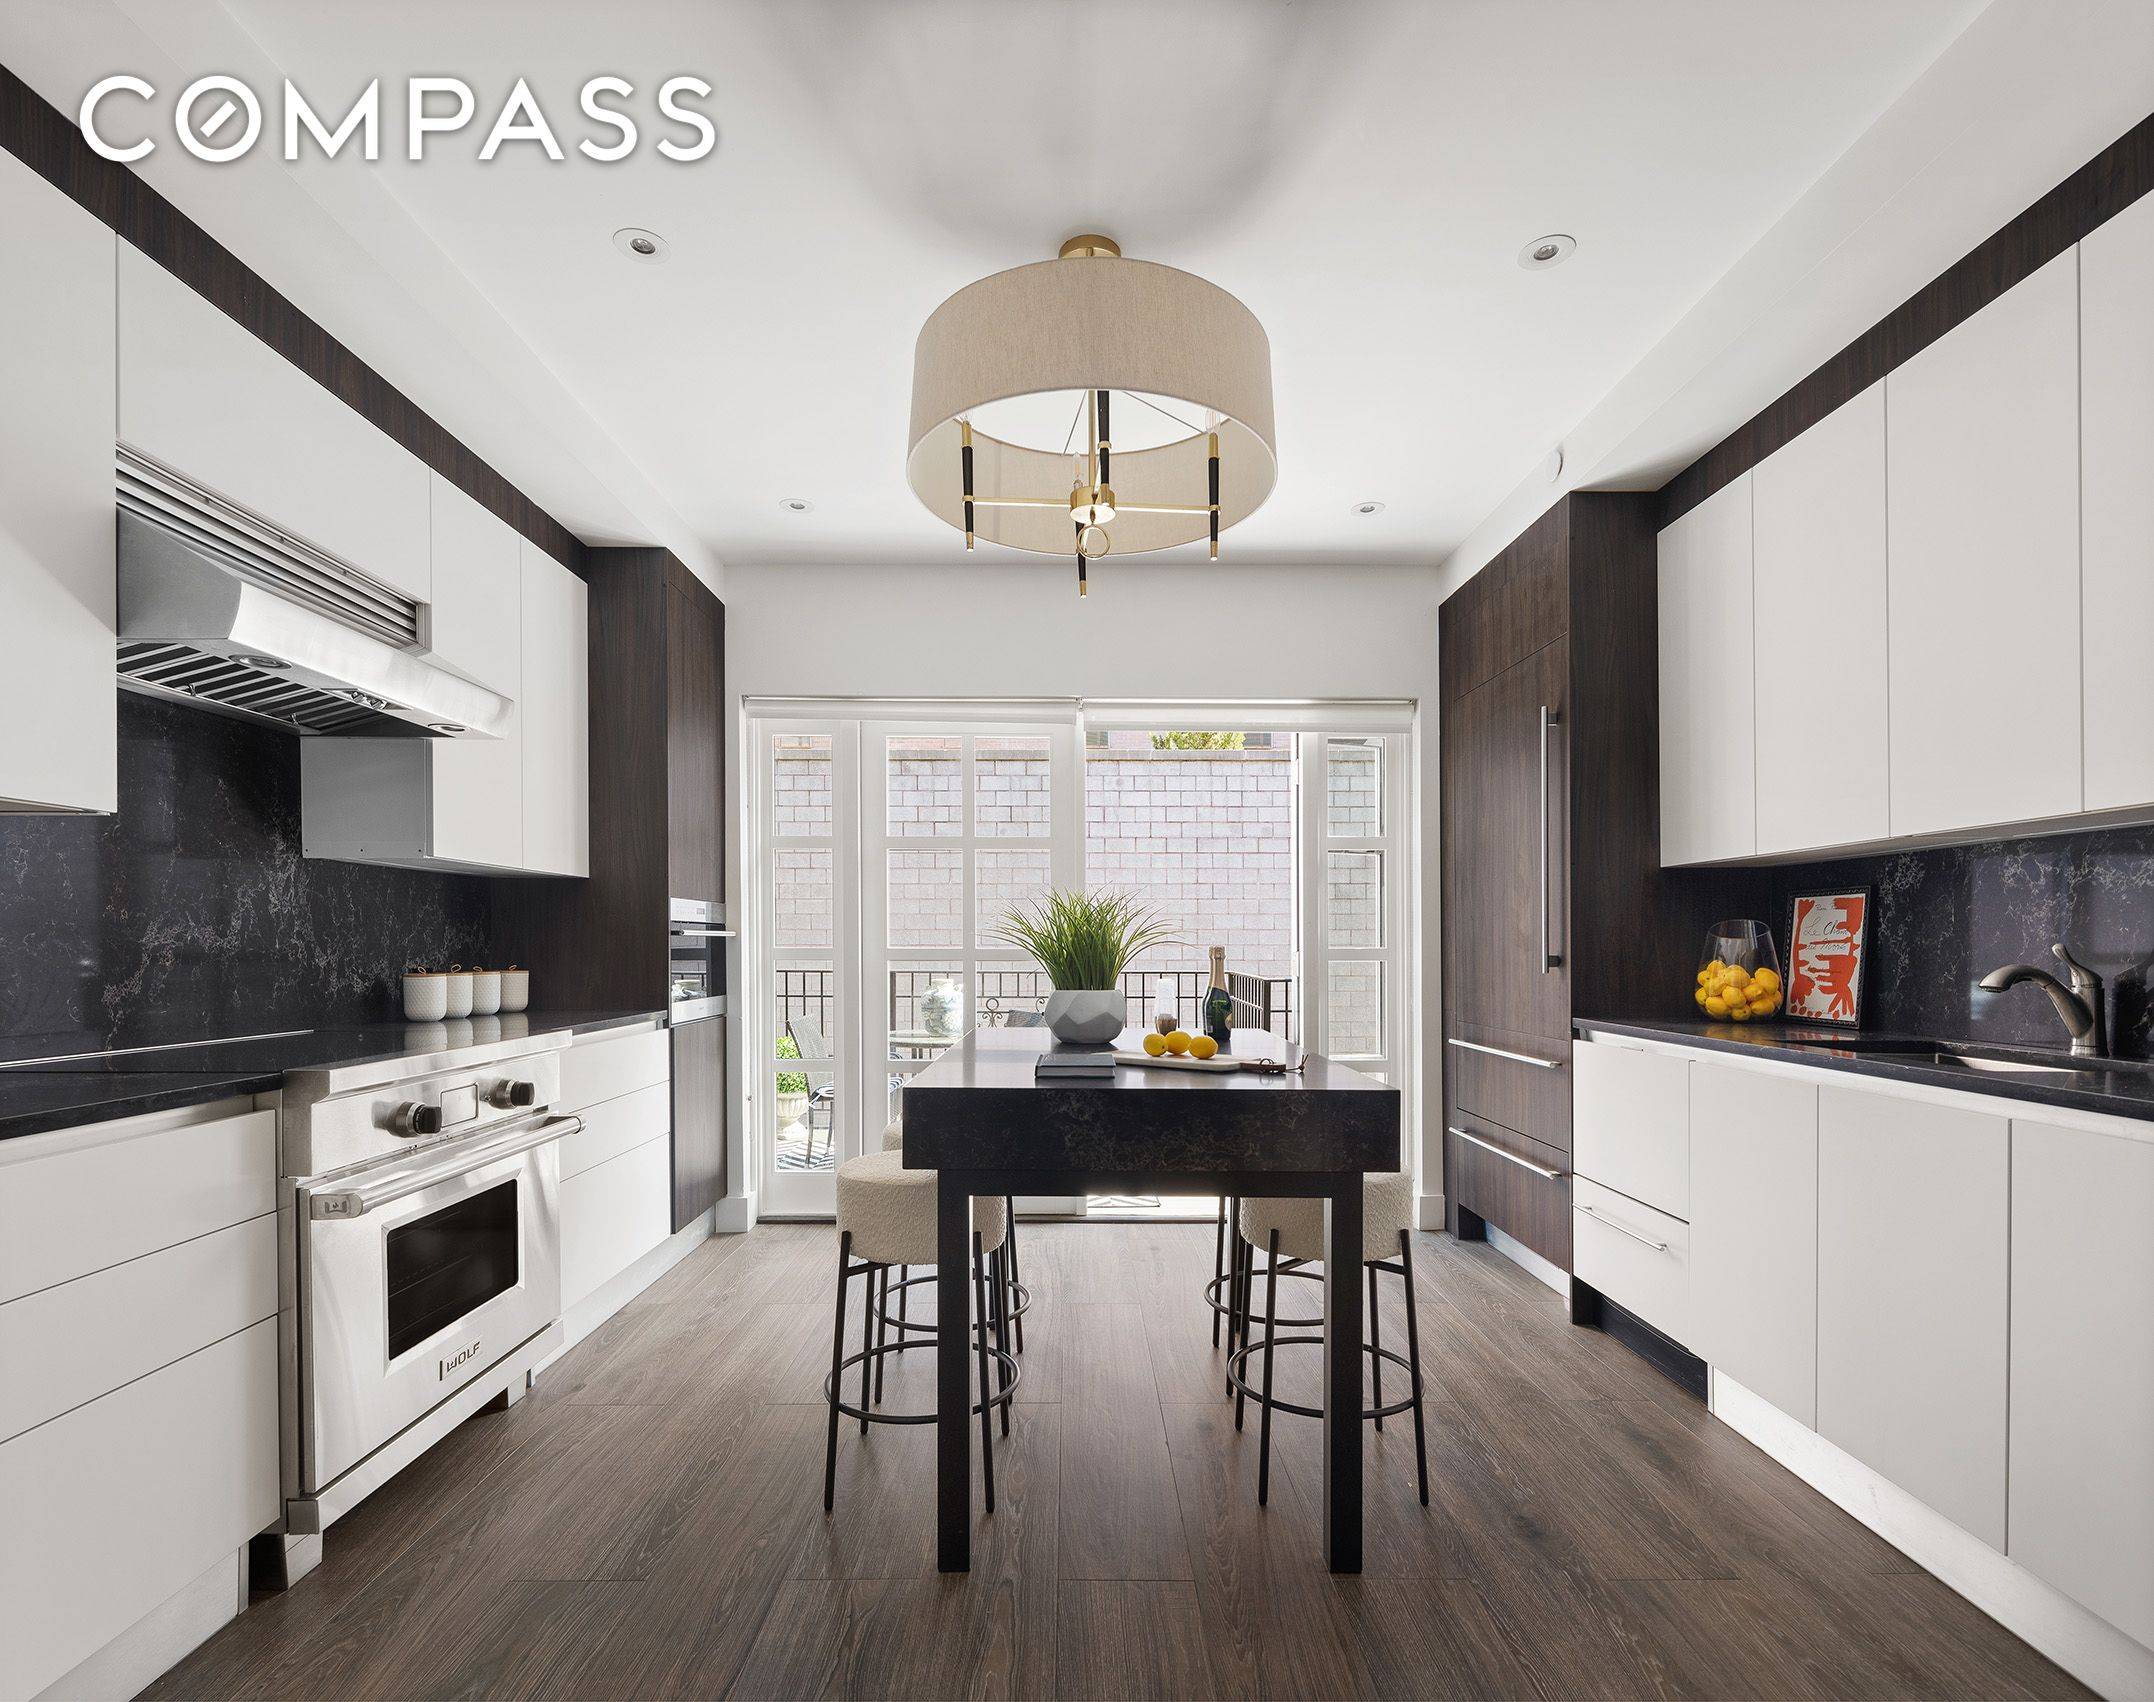 A Modern Oasis in the Heart of Boerum Hill !